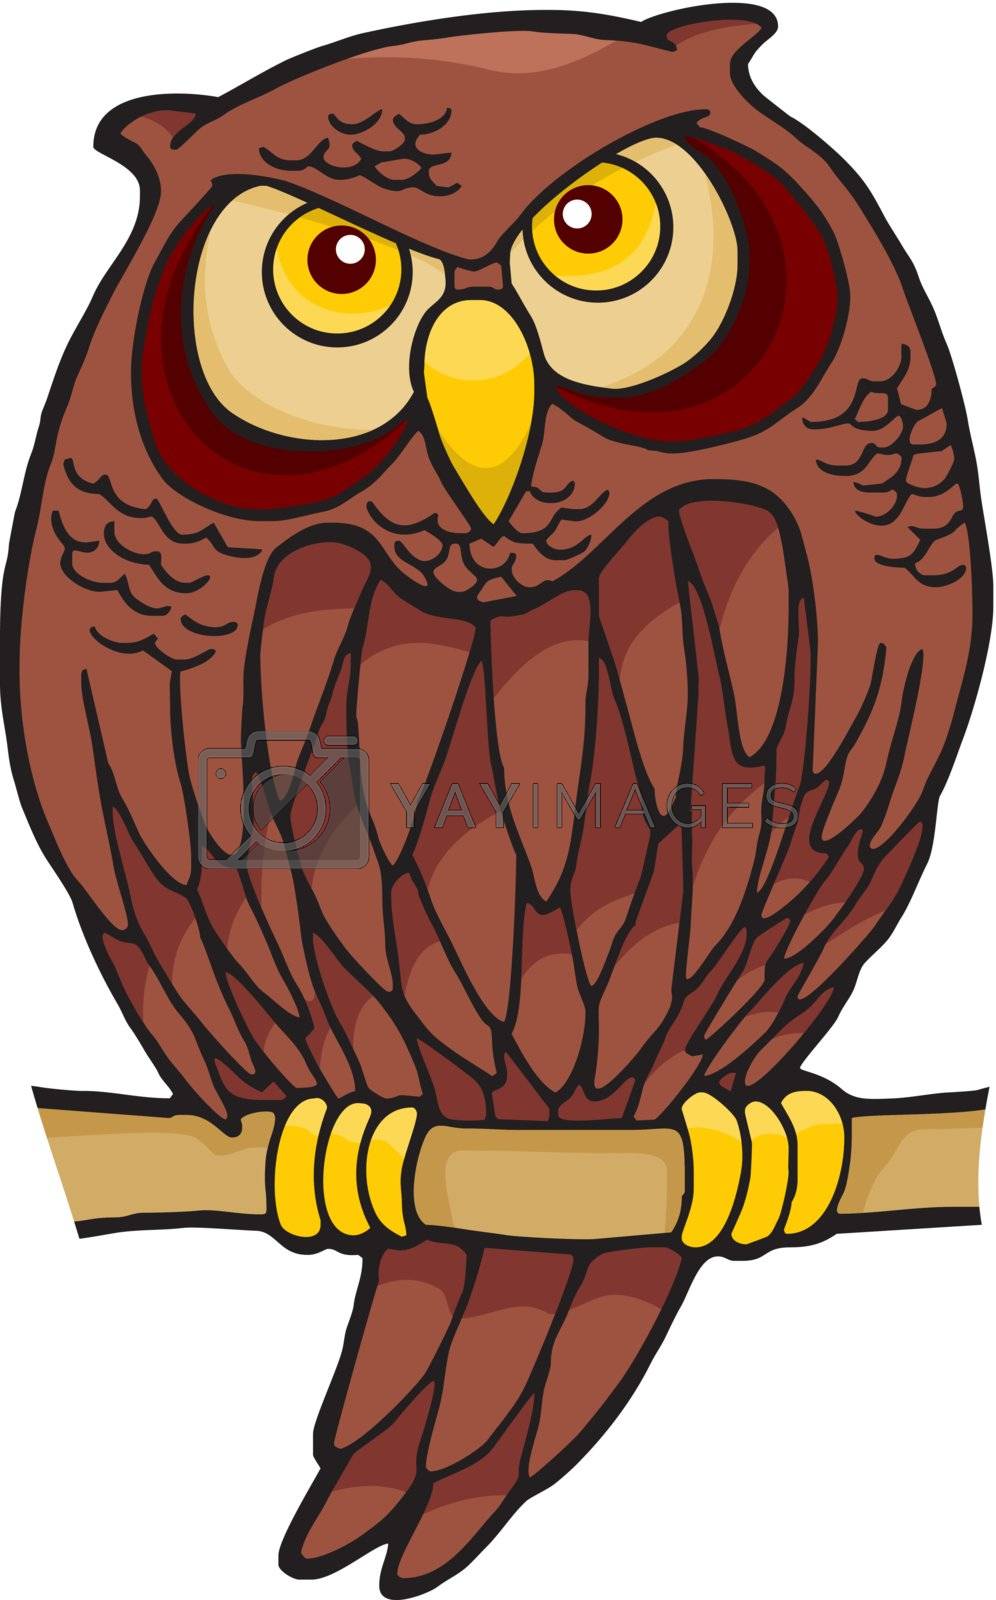 Royalty free image of Owl cartoon by sifis